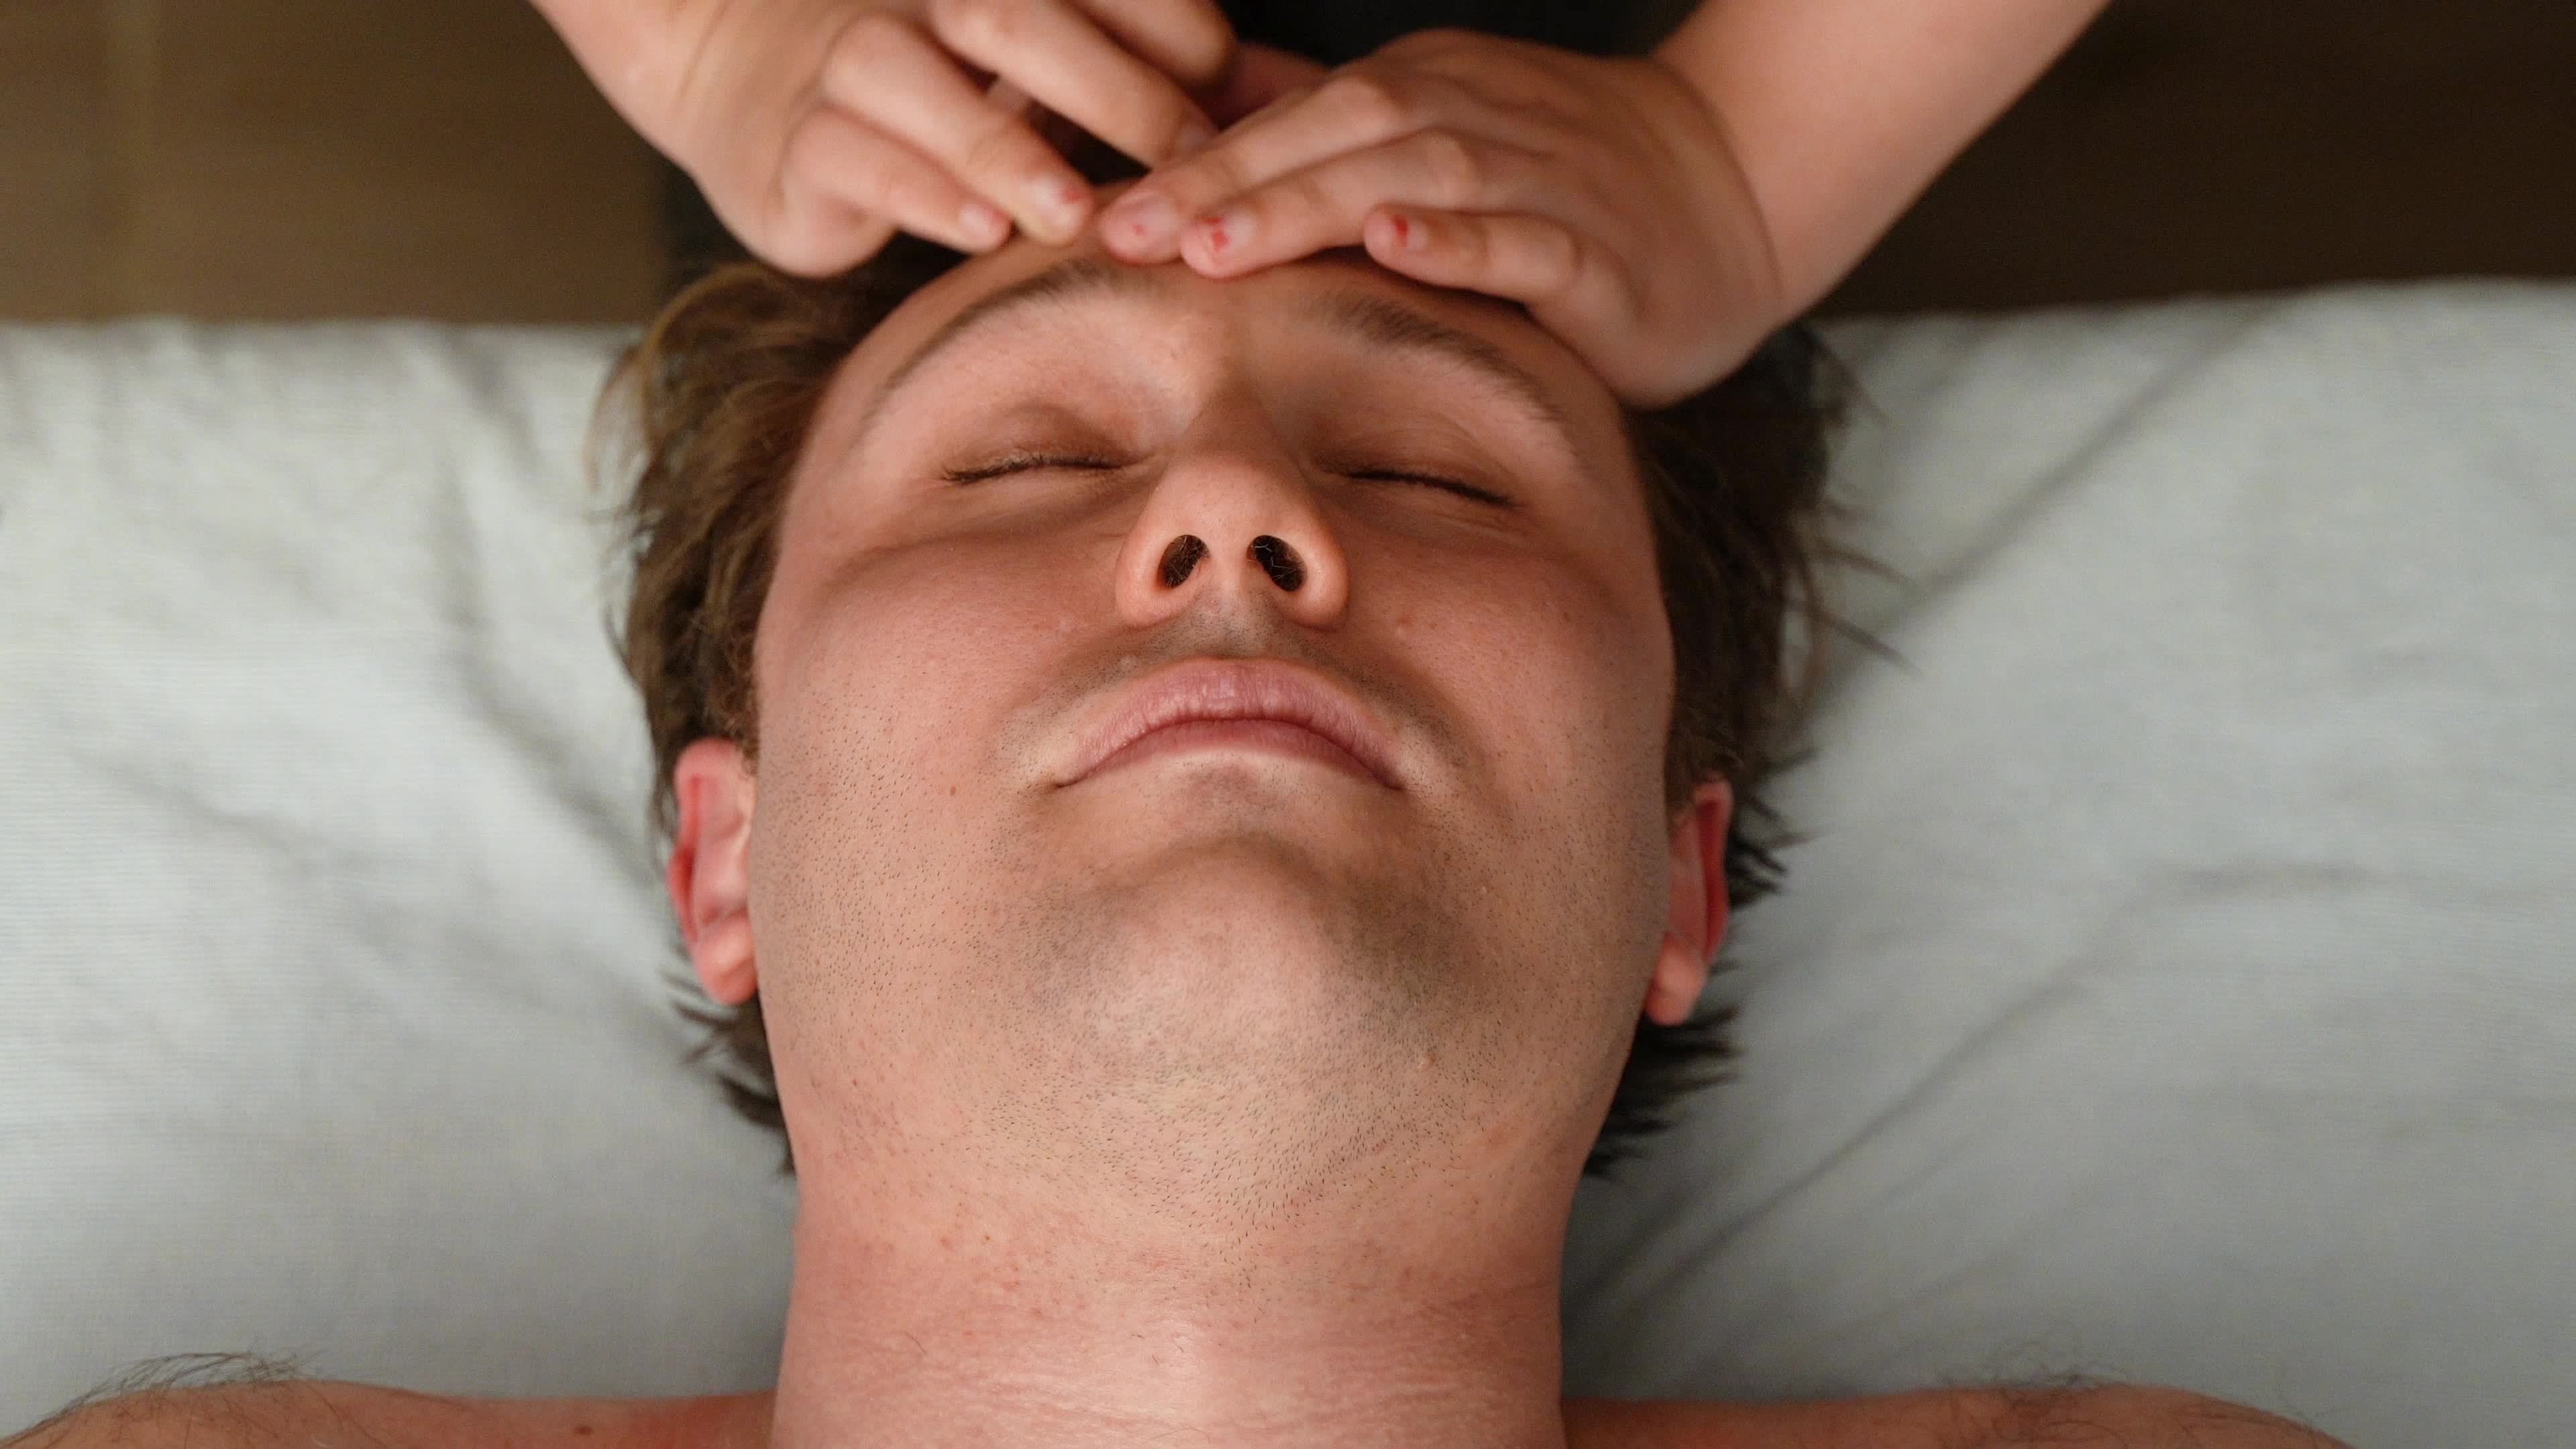 https://static.vecteezy.com/system/resources/thumbnails/008/741/382/original/massage-for-headache-and-neck-pain-man-getting-head-massage-for-pain-relief-video.jpg